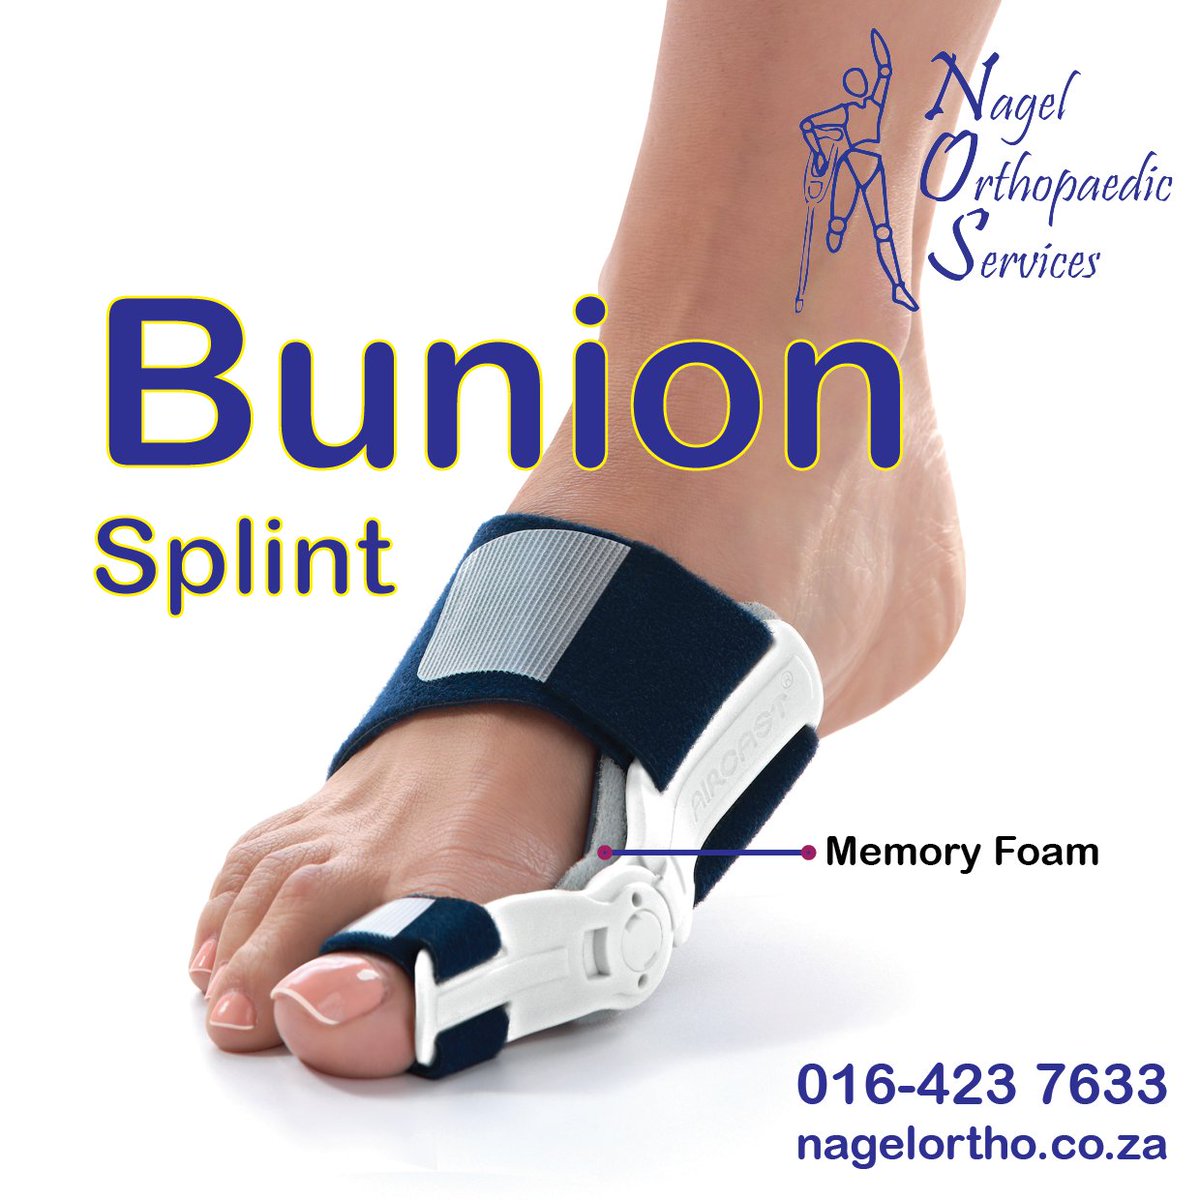 Hallux valgus or Bunion is one of the most common foot deformities, especially for women. Because of its weaker connective tissue, the big toe can become misaligned, resulting in an unsightly painful protrusion from the foot. #orthotics #bunions #halluxvalgus #bunionrelief